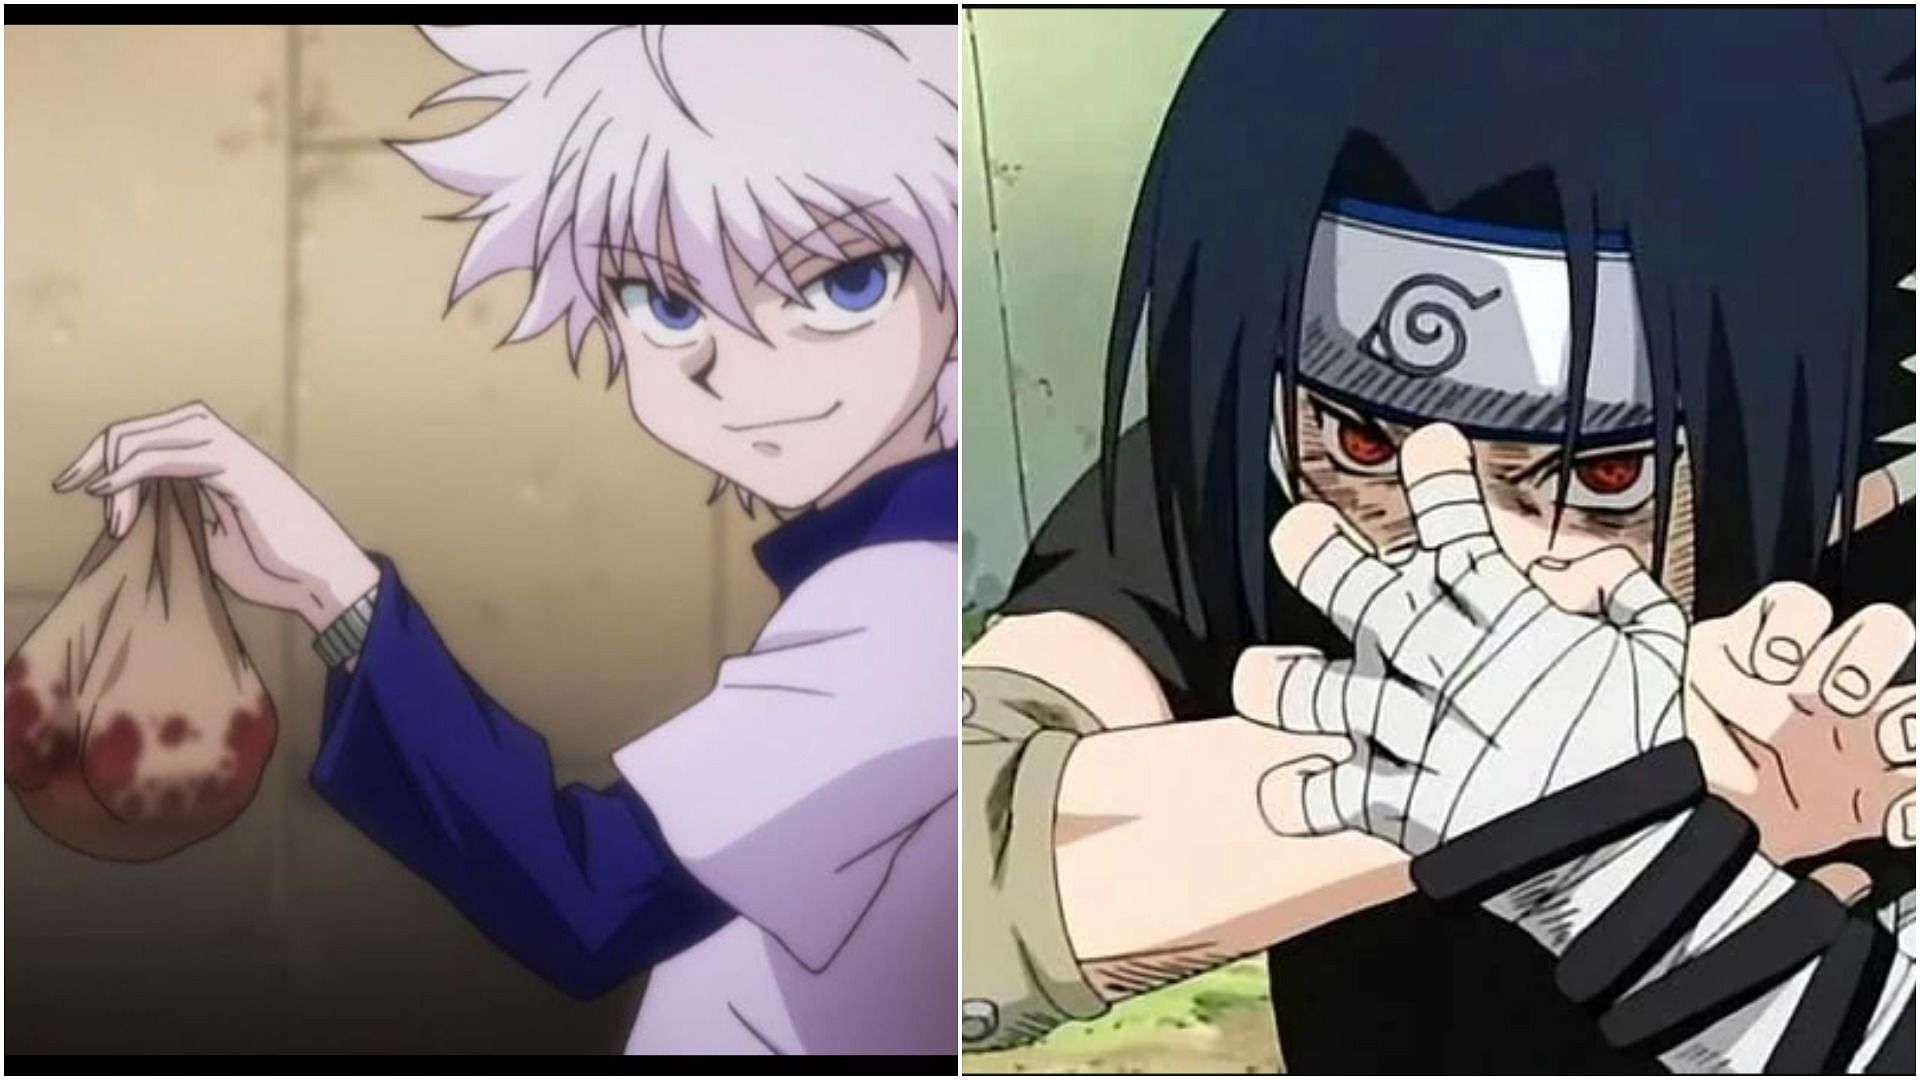 Was Naruto inspired by Hunter x Hunter? The answer to the burning question